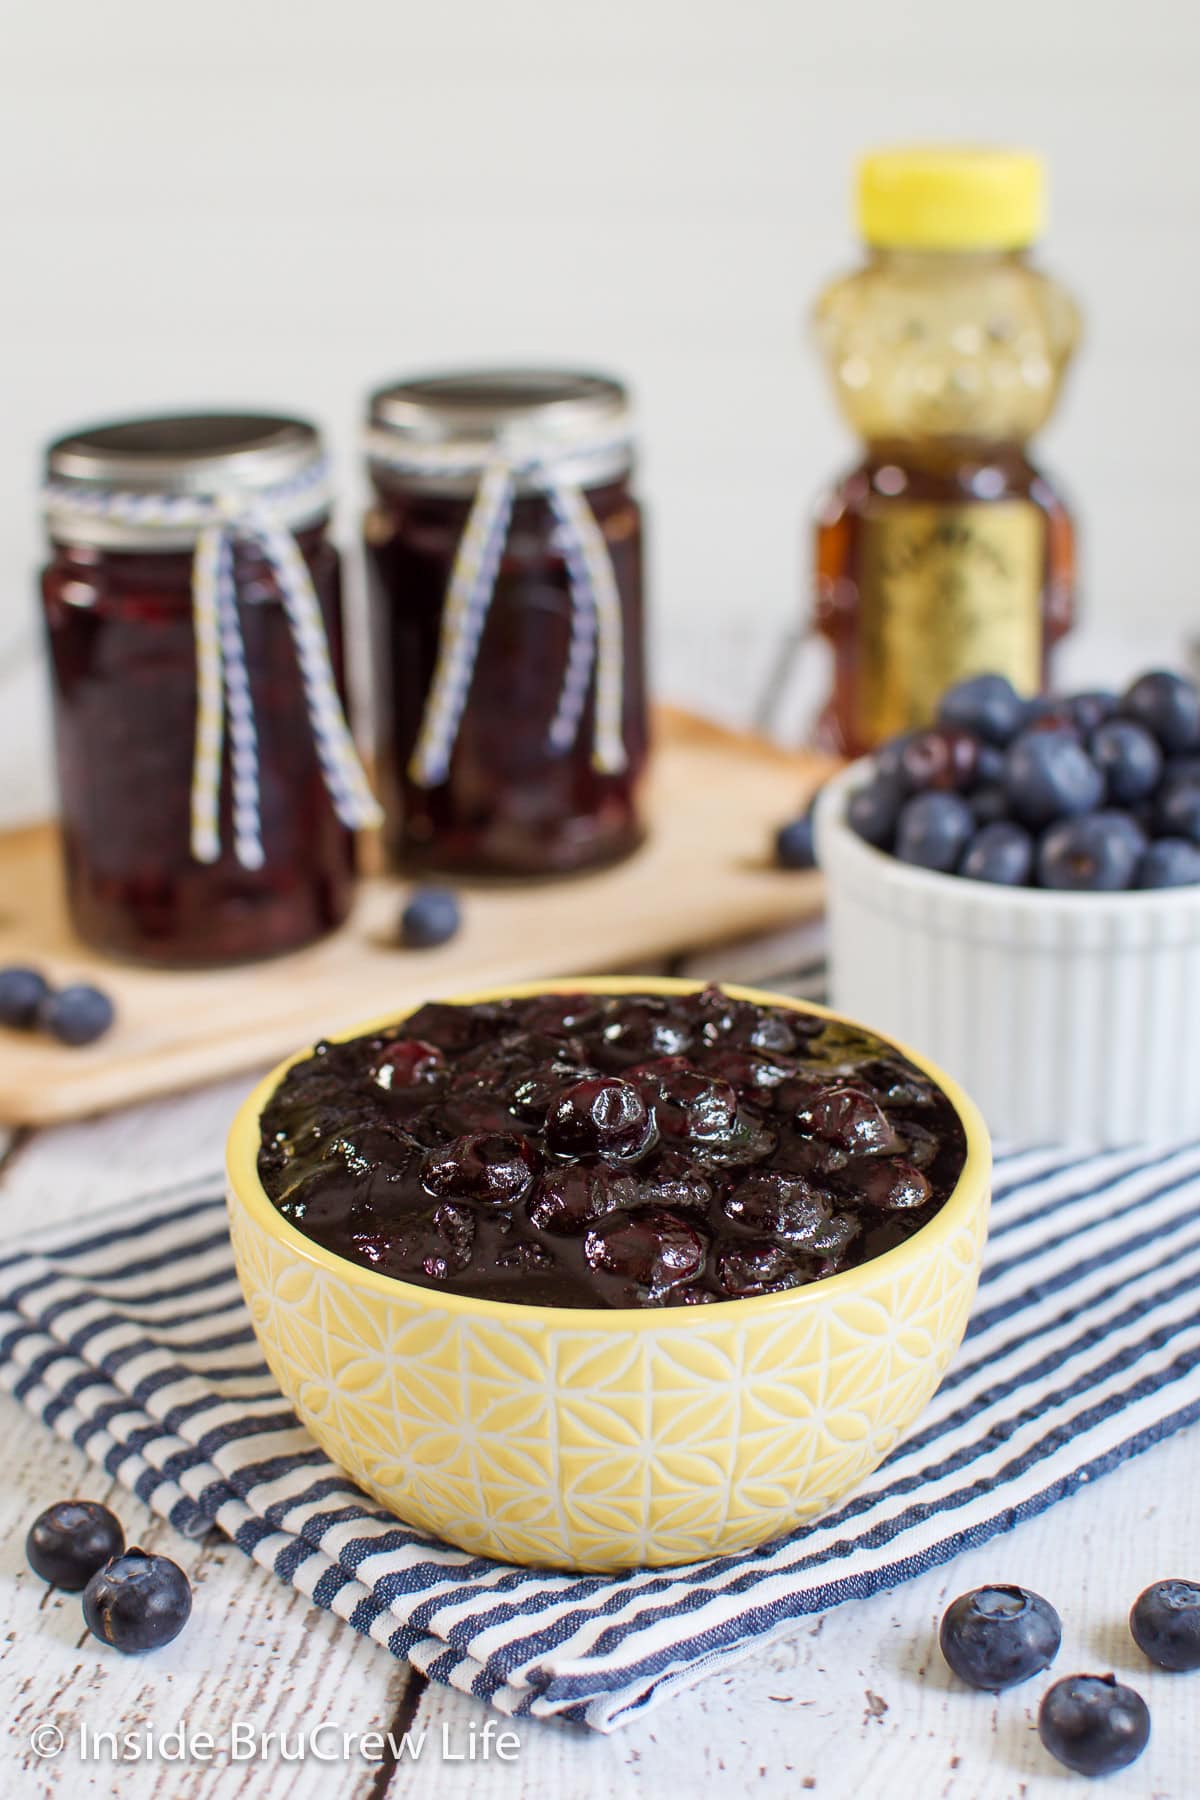 A yellow bowl filled with a homemade blueberry topping.